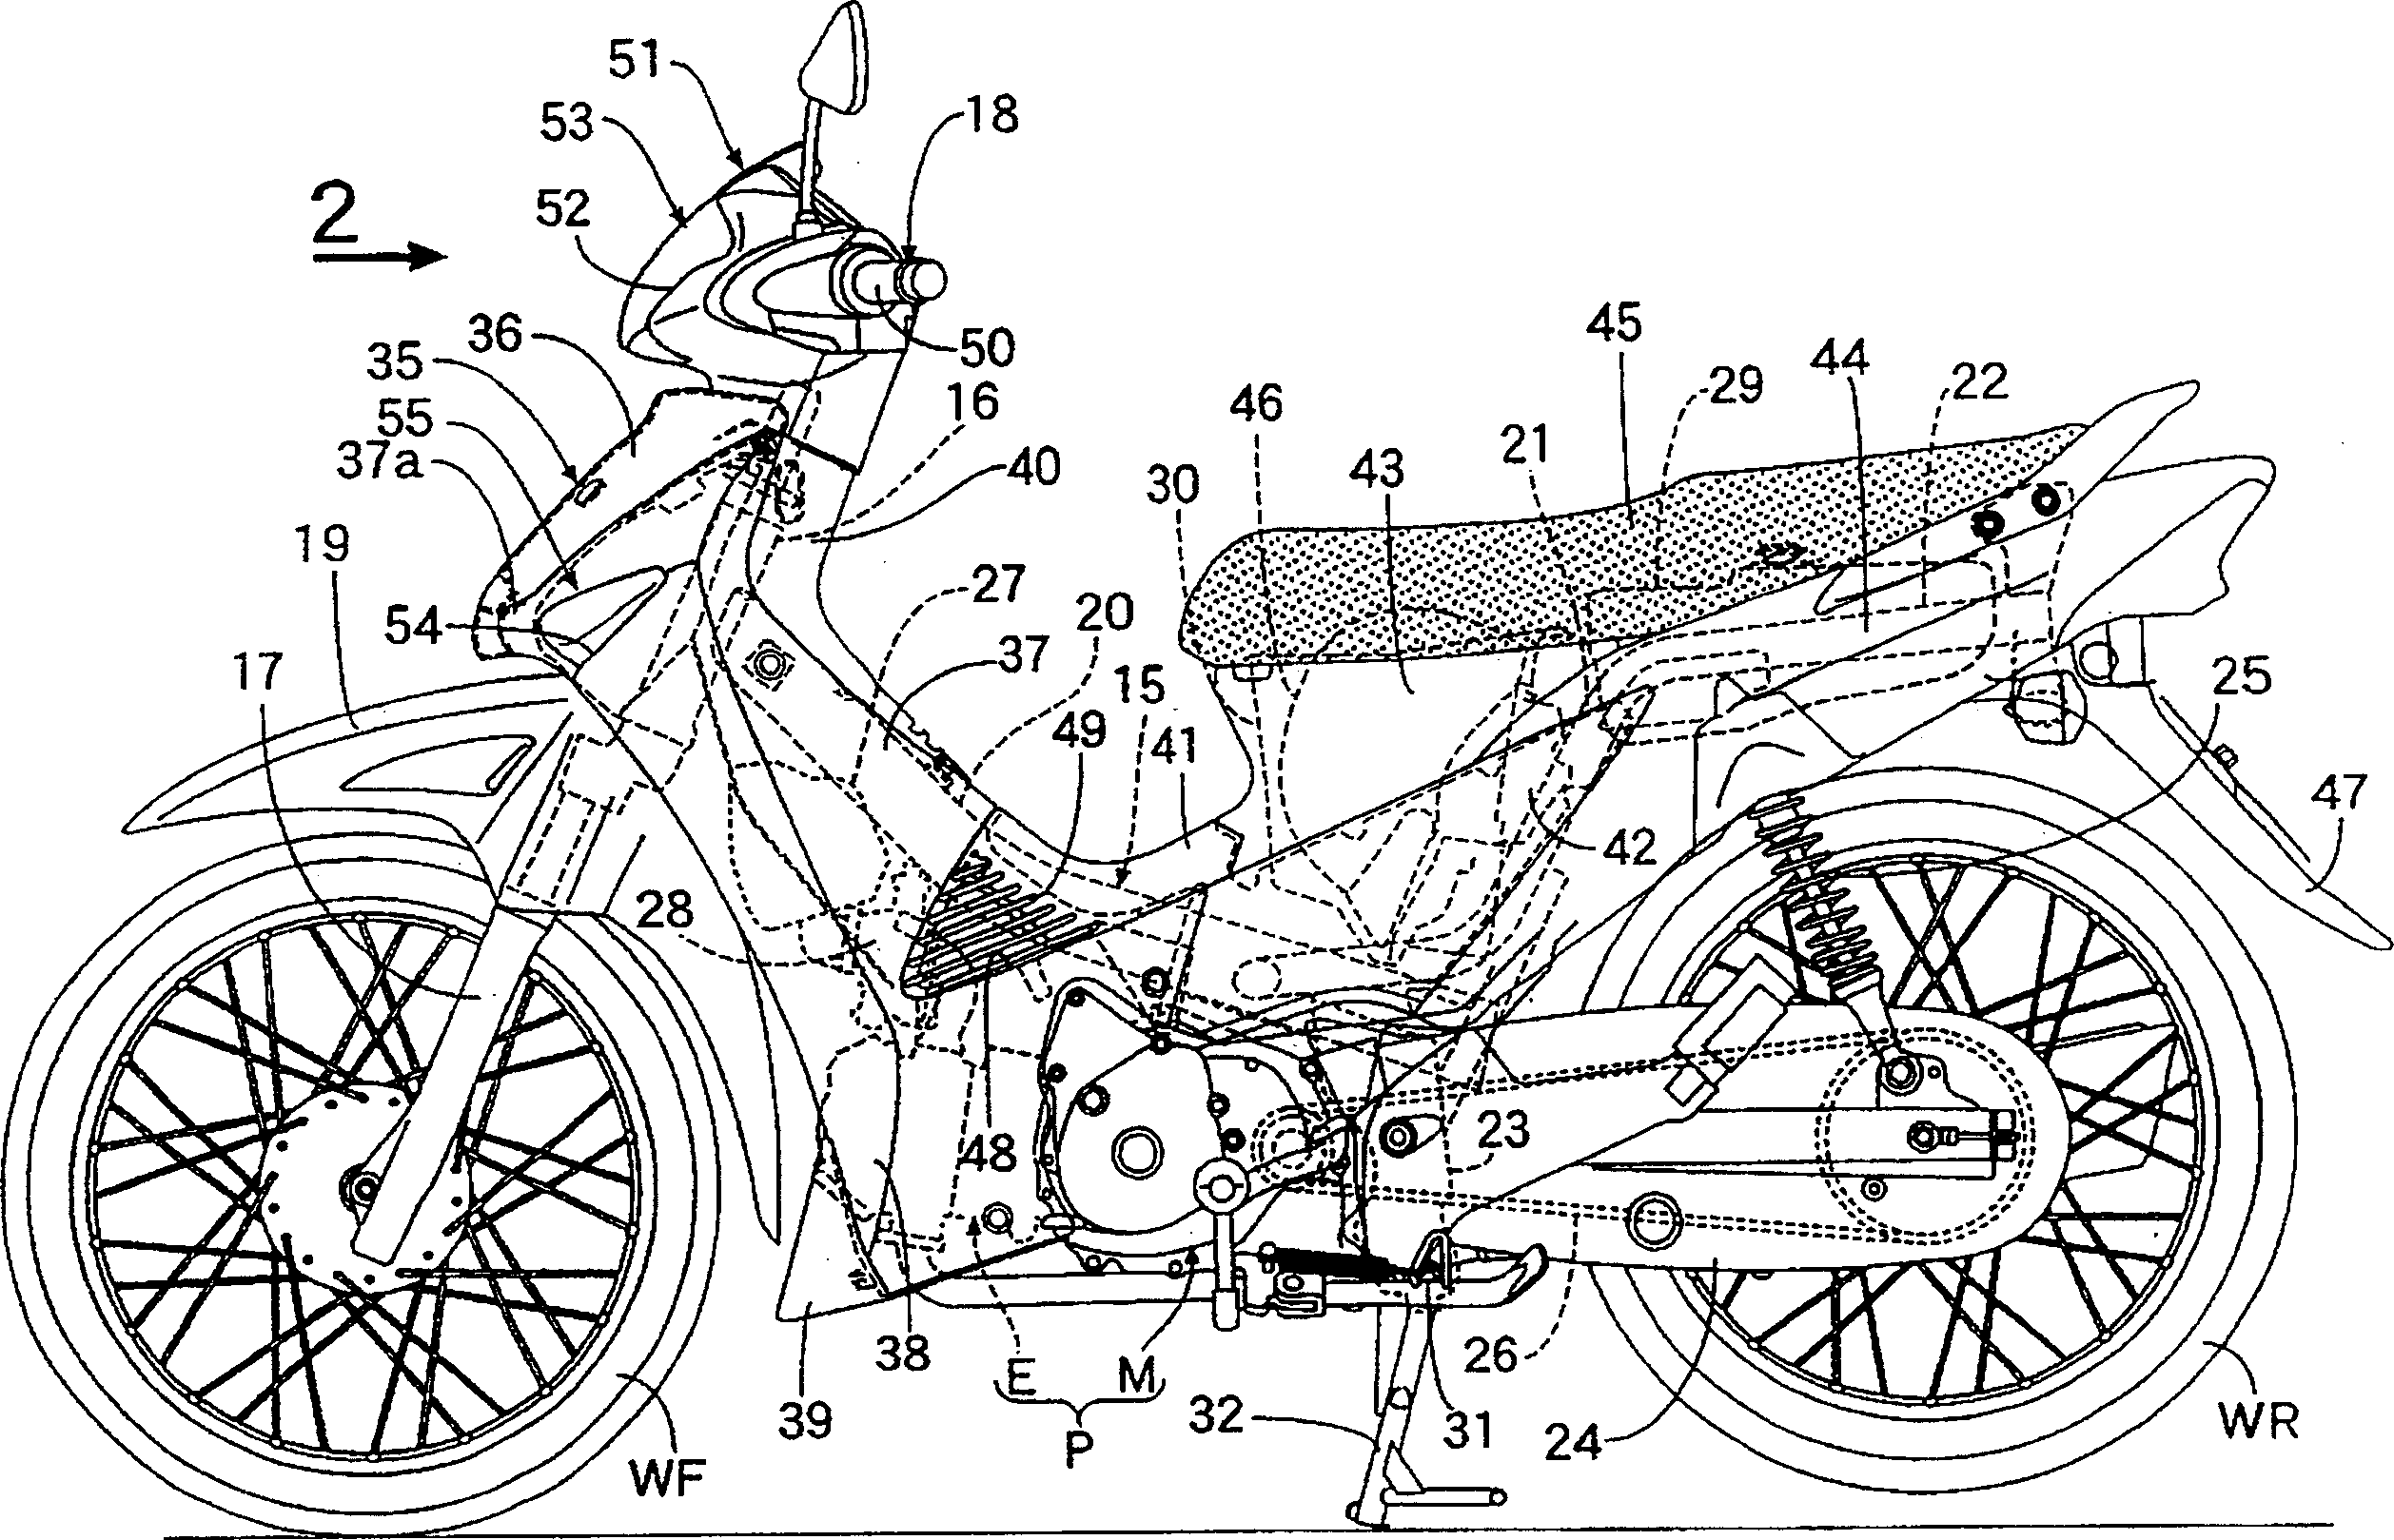 Handle cover apparatus for a motorcycle